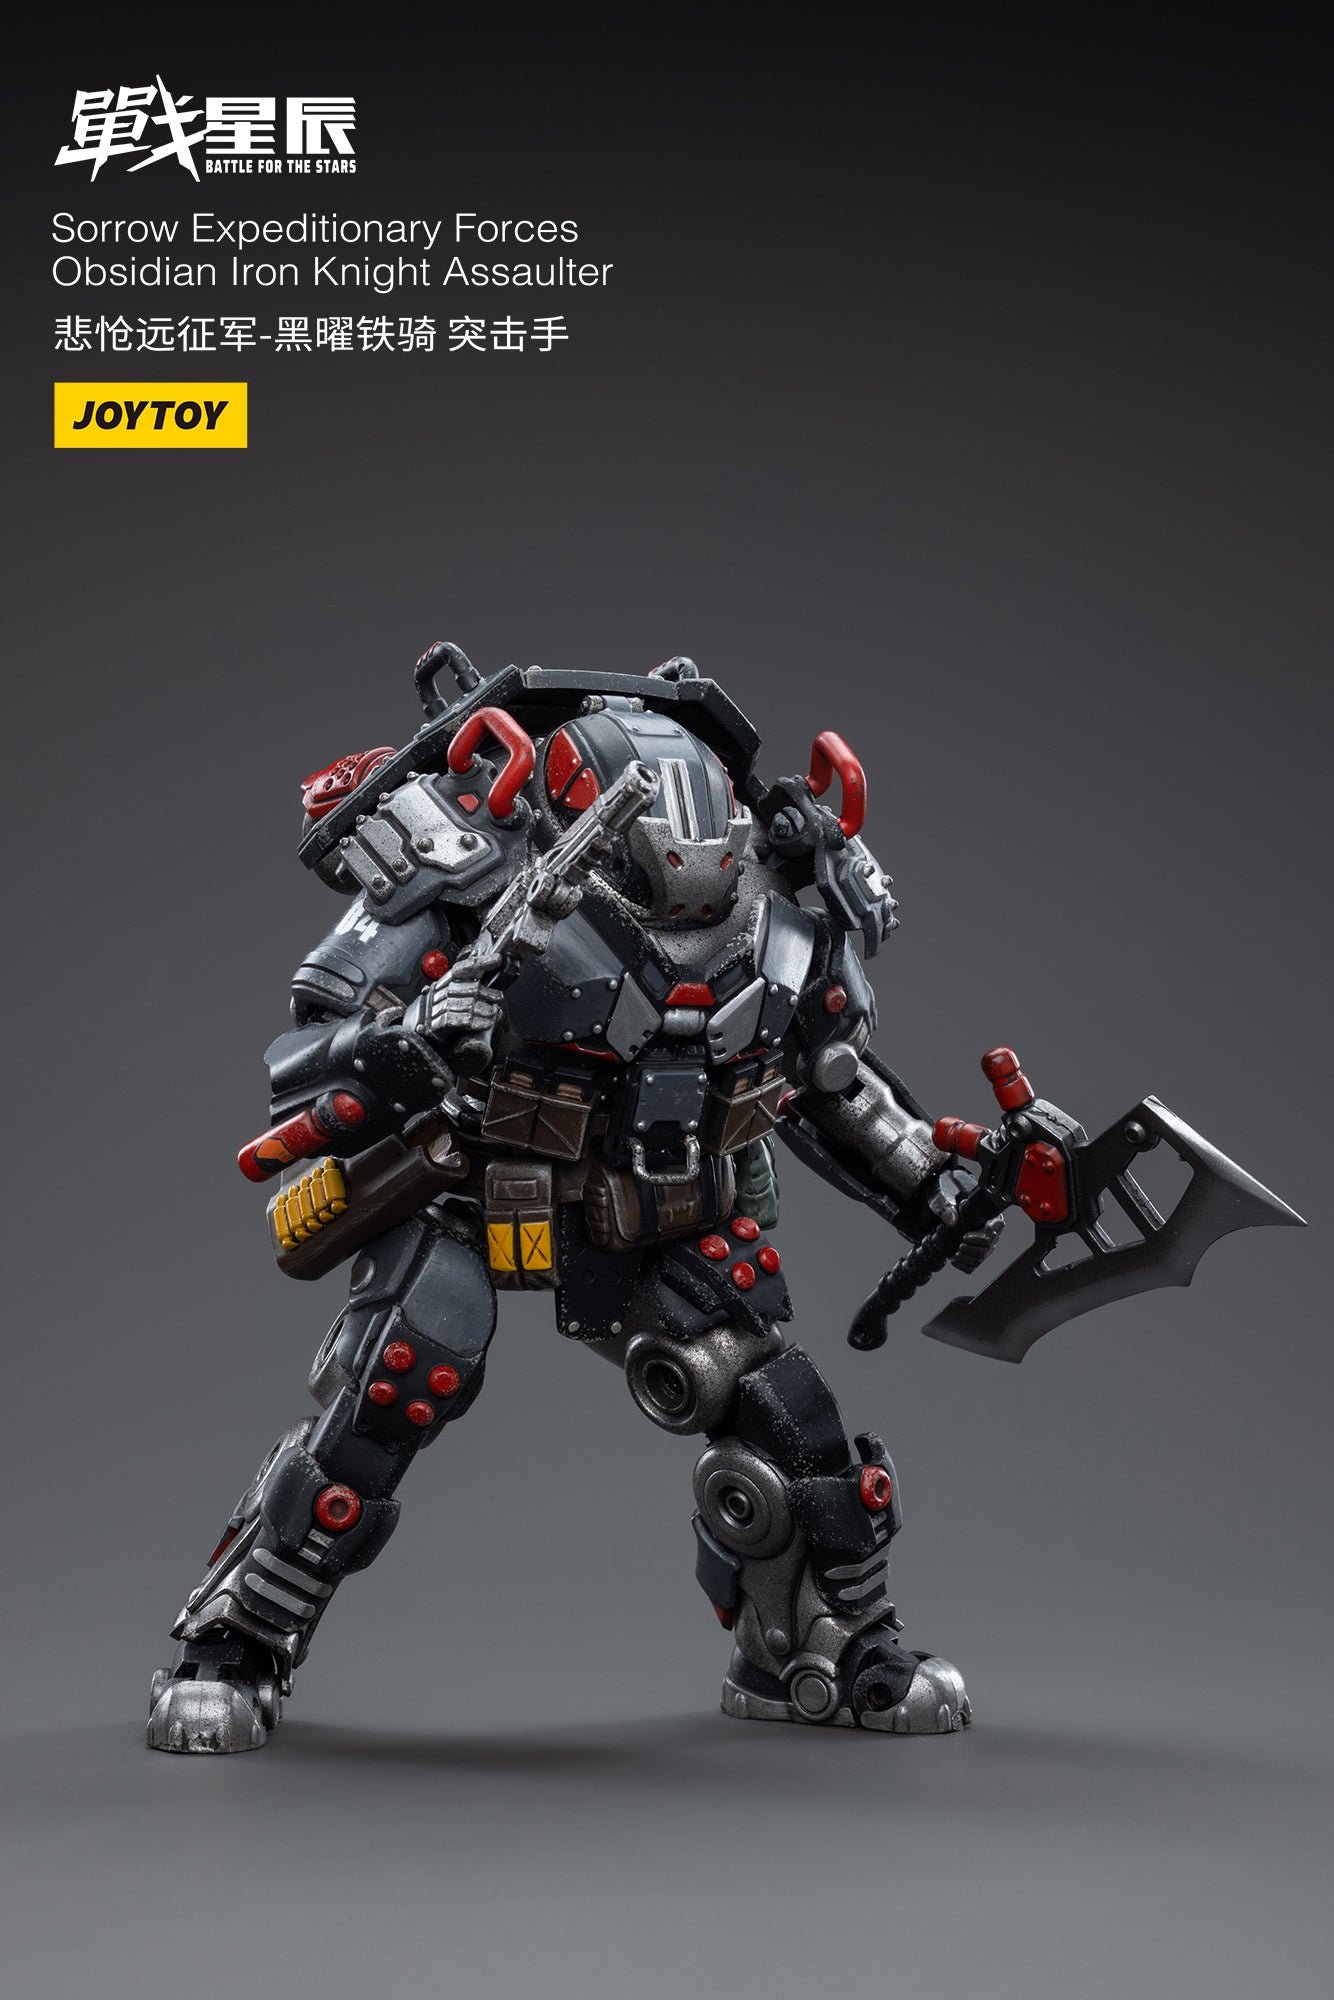 From Joy Toy, this Sorrow Expeditionary Forces 9th Army of the White Iron Cavalry Firepower Man and Obsidian Iron Knight Assaulter action figures are incredibly detailed in 1/18 scale. JoyToy figure is highly articulated and includes weapon accessories as well as interchangeable hands.